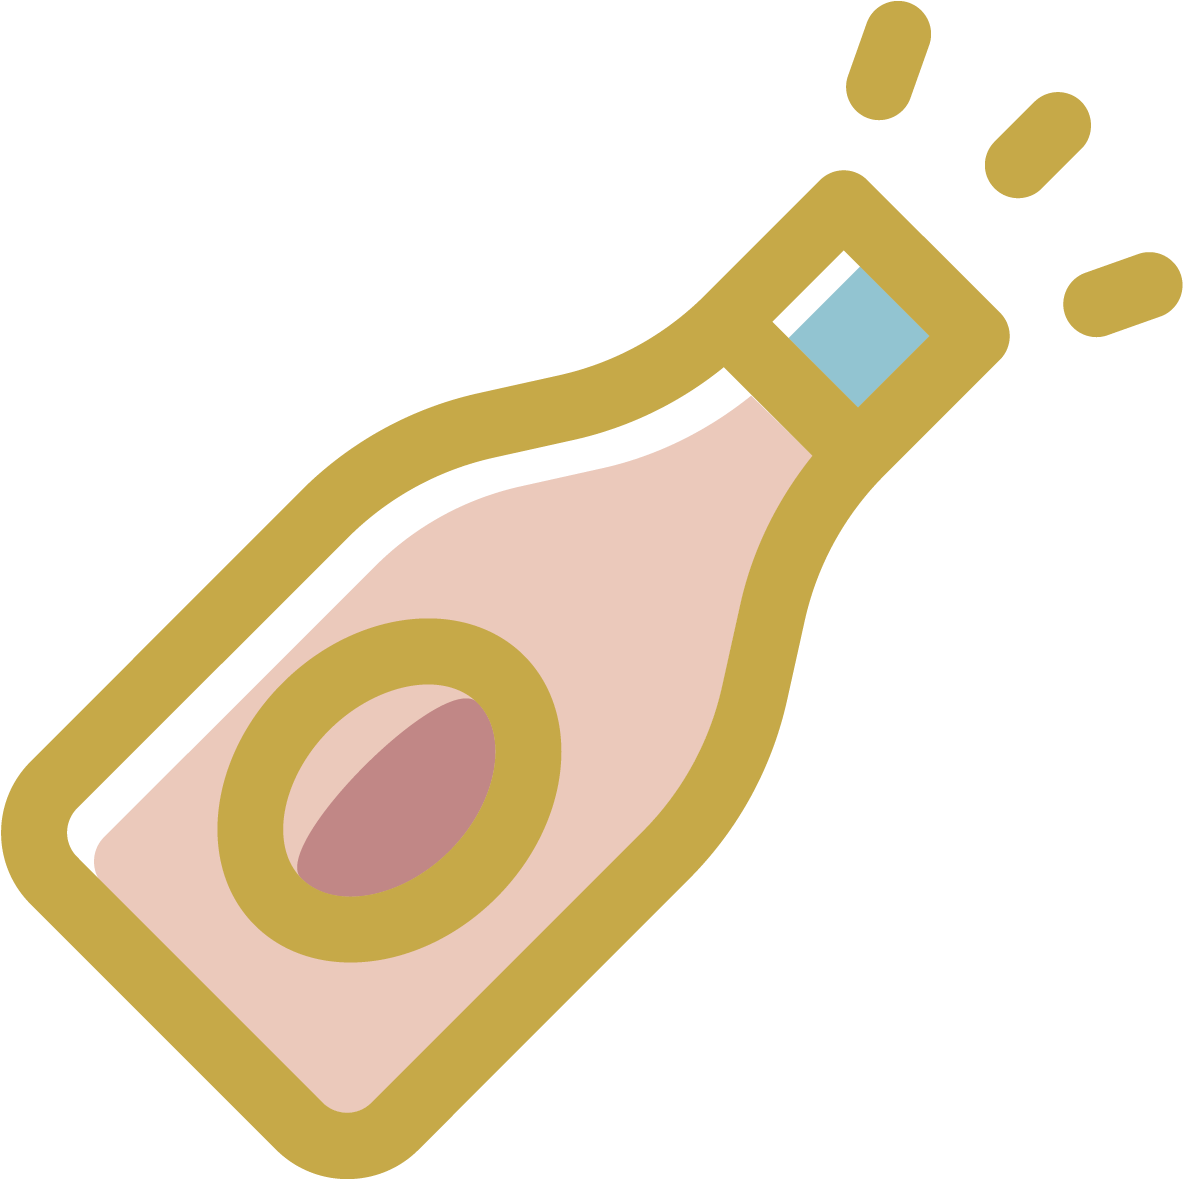 A Pink Bottle With A Gold Circle